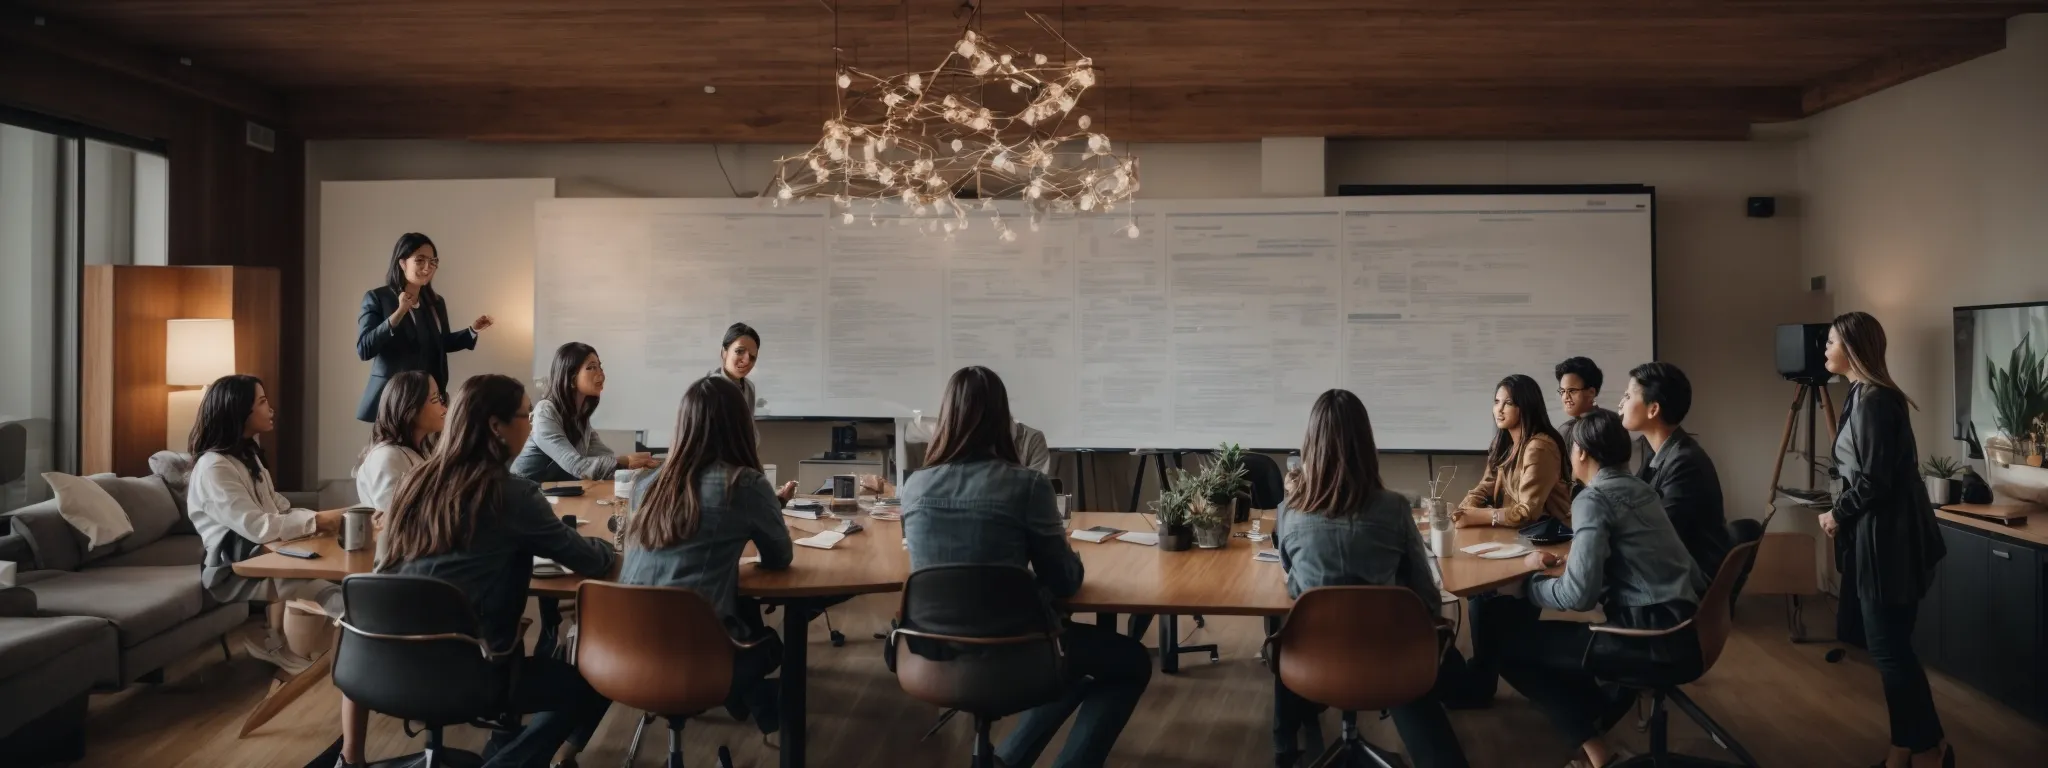 a digital marketing team gathered around a conference table, strategizing over a large flowchart that outlines their integrated content marketing and seo plan.